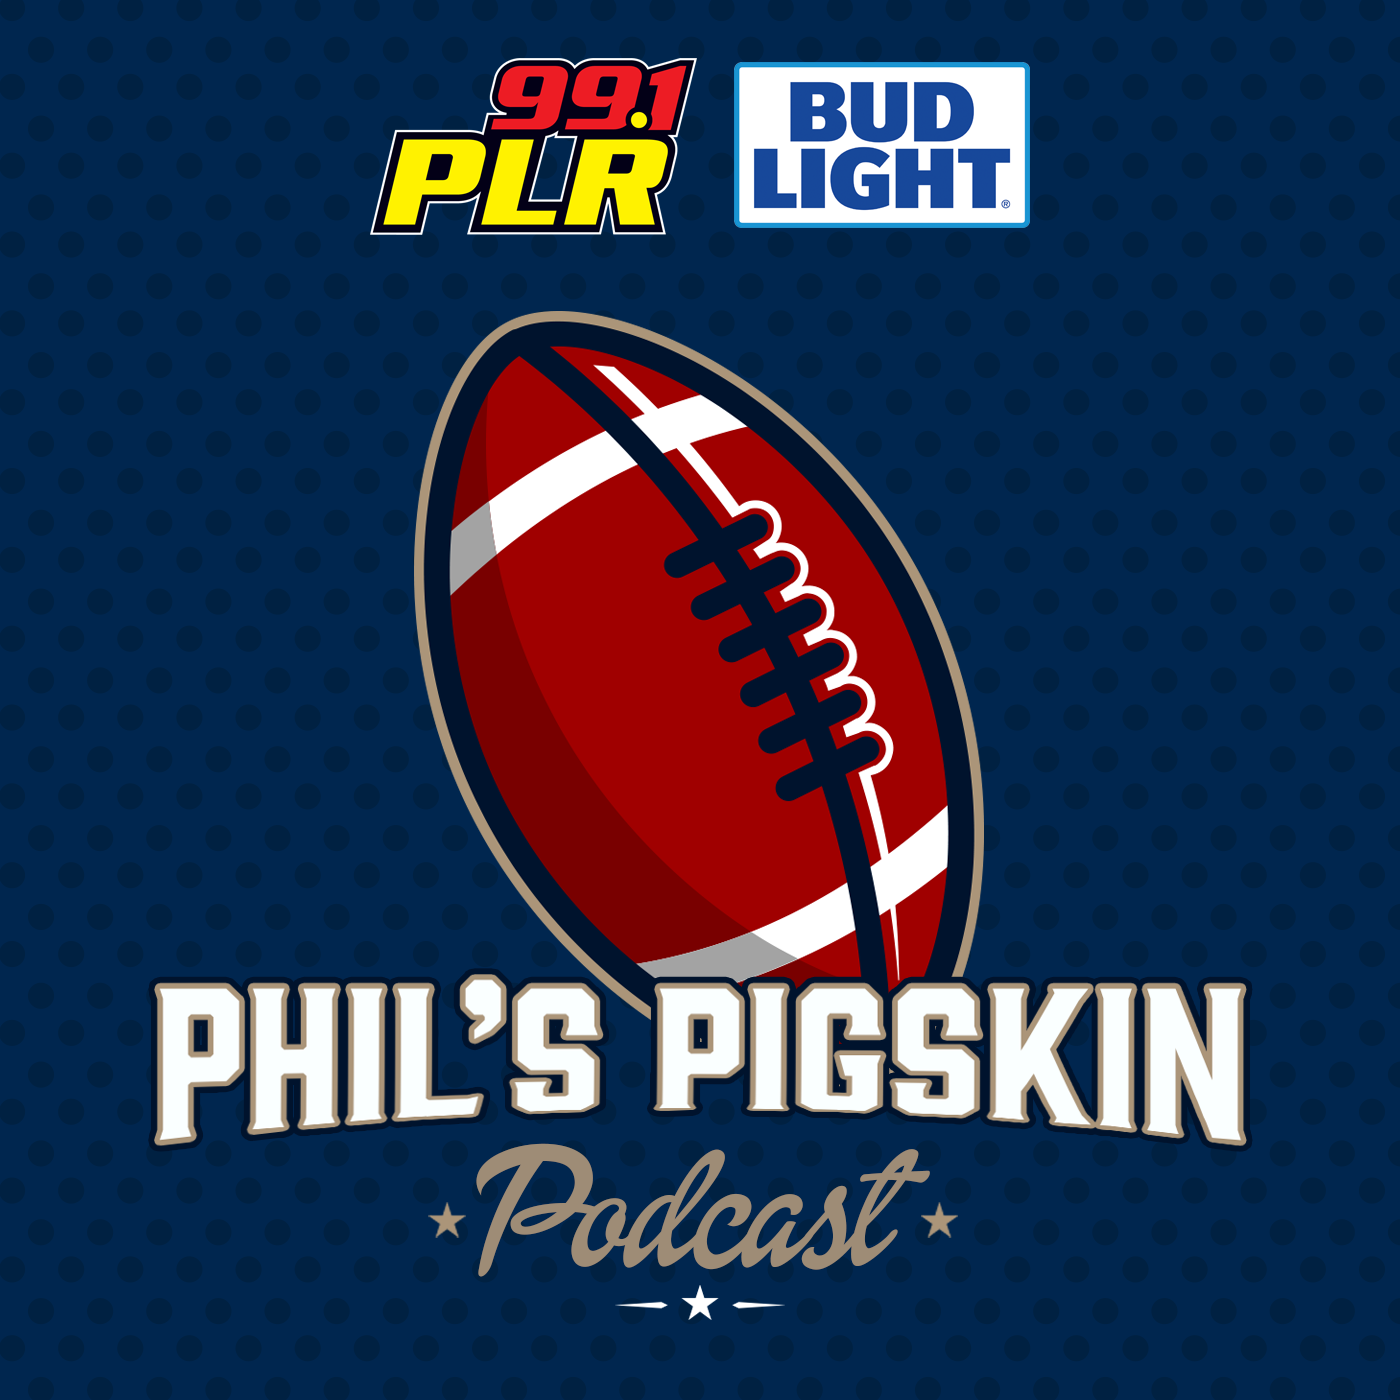 Phil’s Pigskin Podcast – The Fan Experience, Stinks